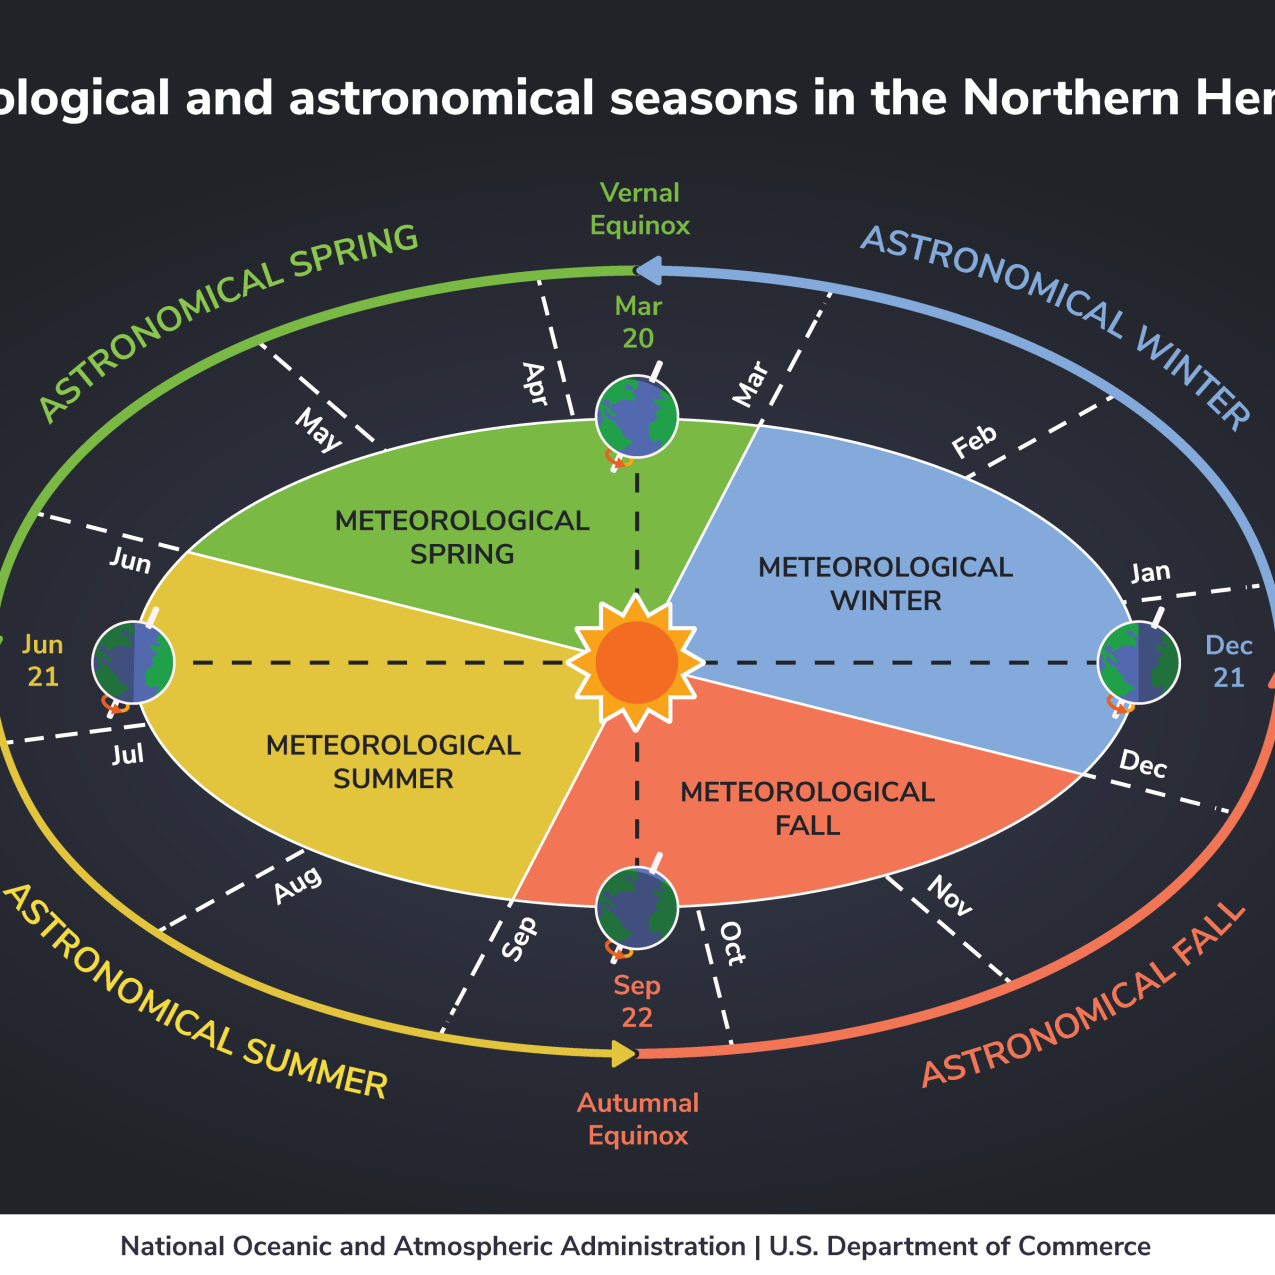 A graphic of the Earth’s orbit around the sun. Meteorological seasons: Winter starts on Dec. 1, spring on Mar. 1, summer on June 1, and fall on Sept. 1. Astronomical seasons: Winter begins on the winter solstice (Dec. 21) when the North Pole is tilted to the max extent away from the sun, spring begins on the spring equinox (Mar. 20), summer begins on the summer solstice (June 21), when the North Pole is tilted to the max extent toward the sun, and fall begins on the autumnal equinox (Sept.21).